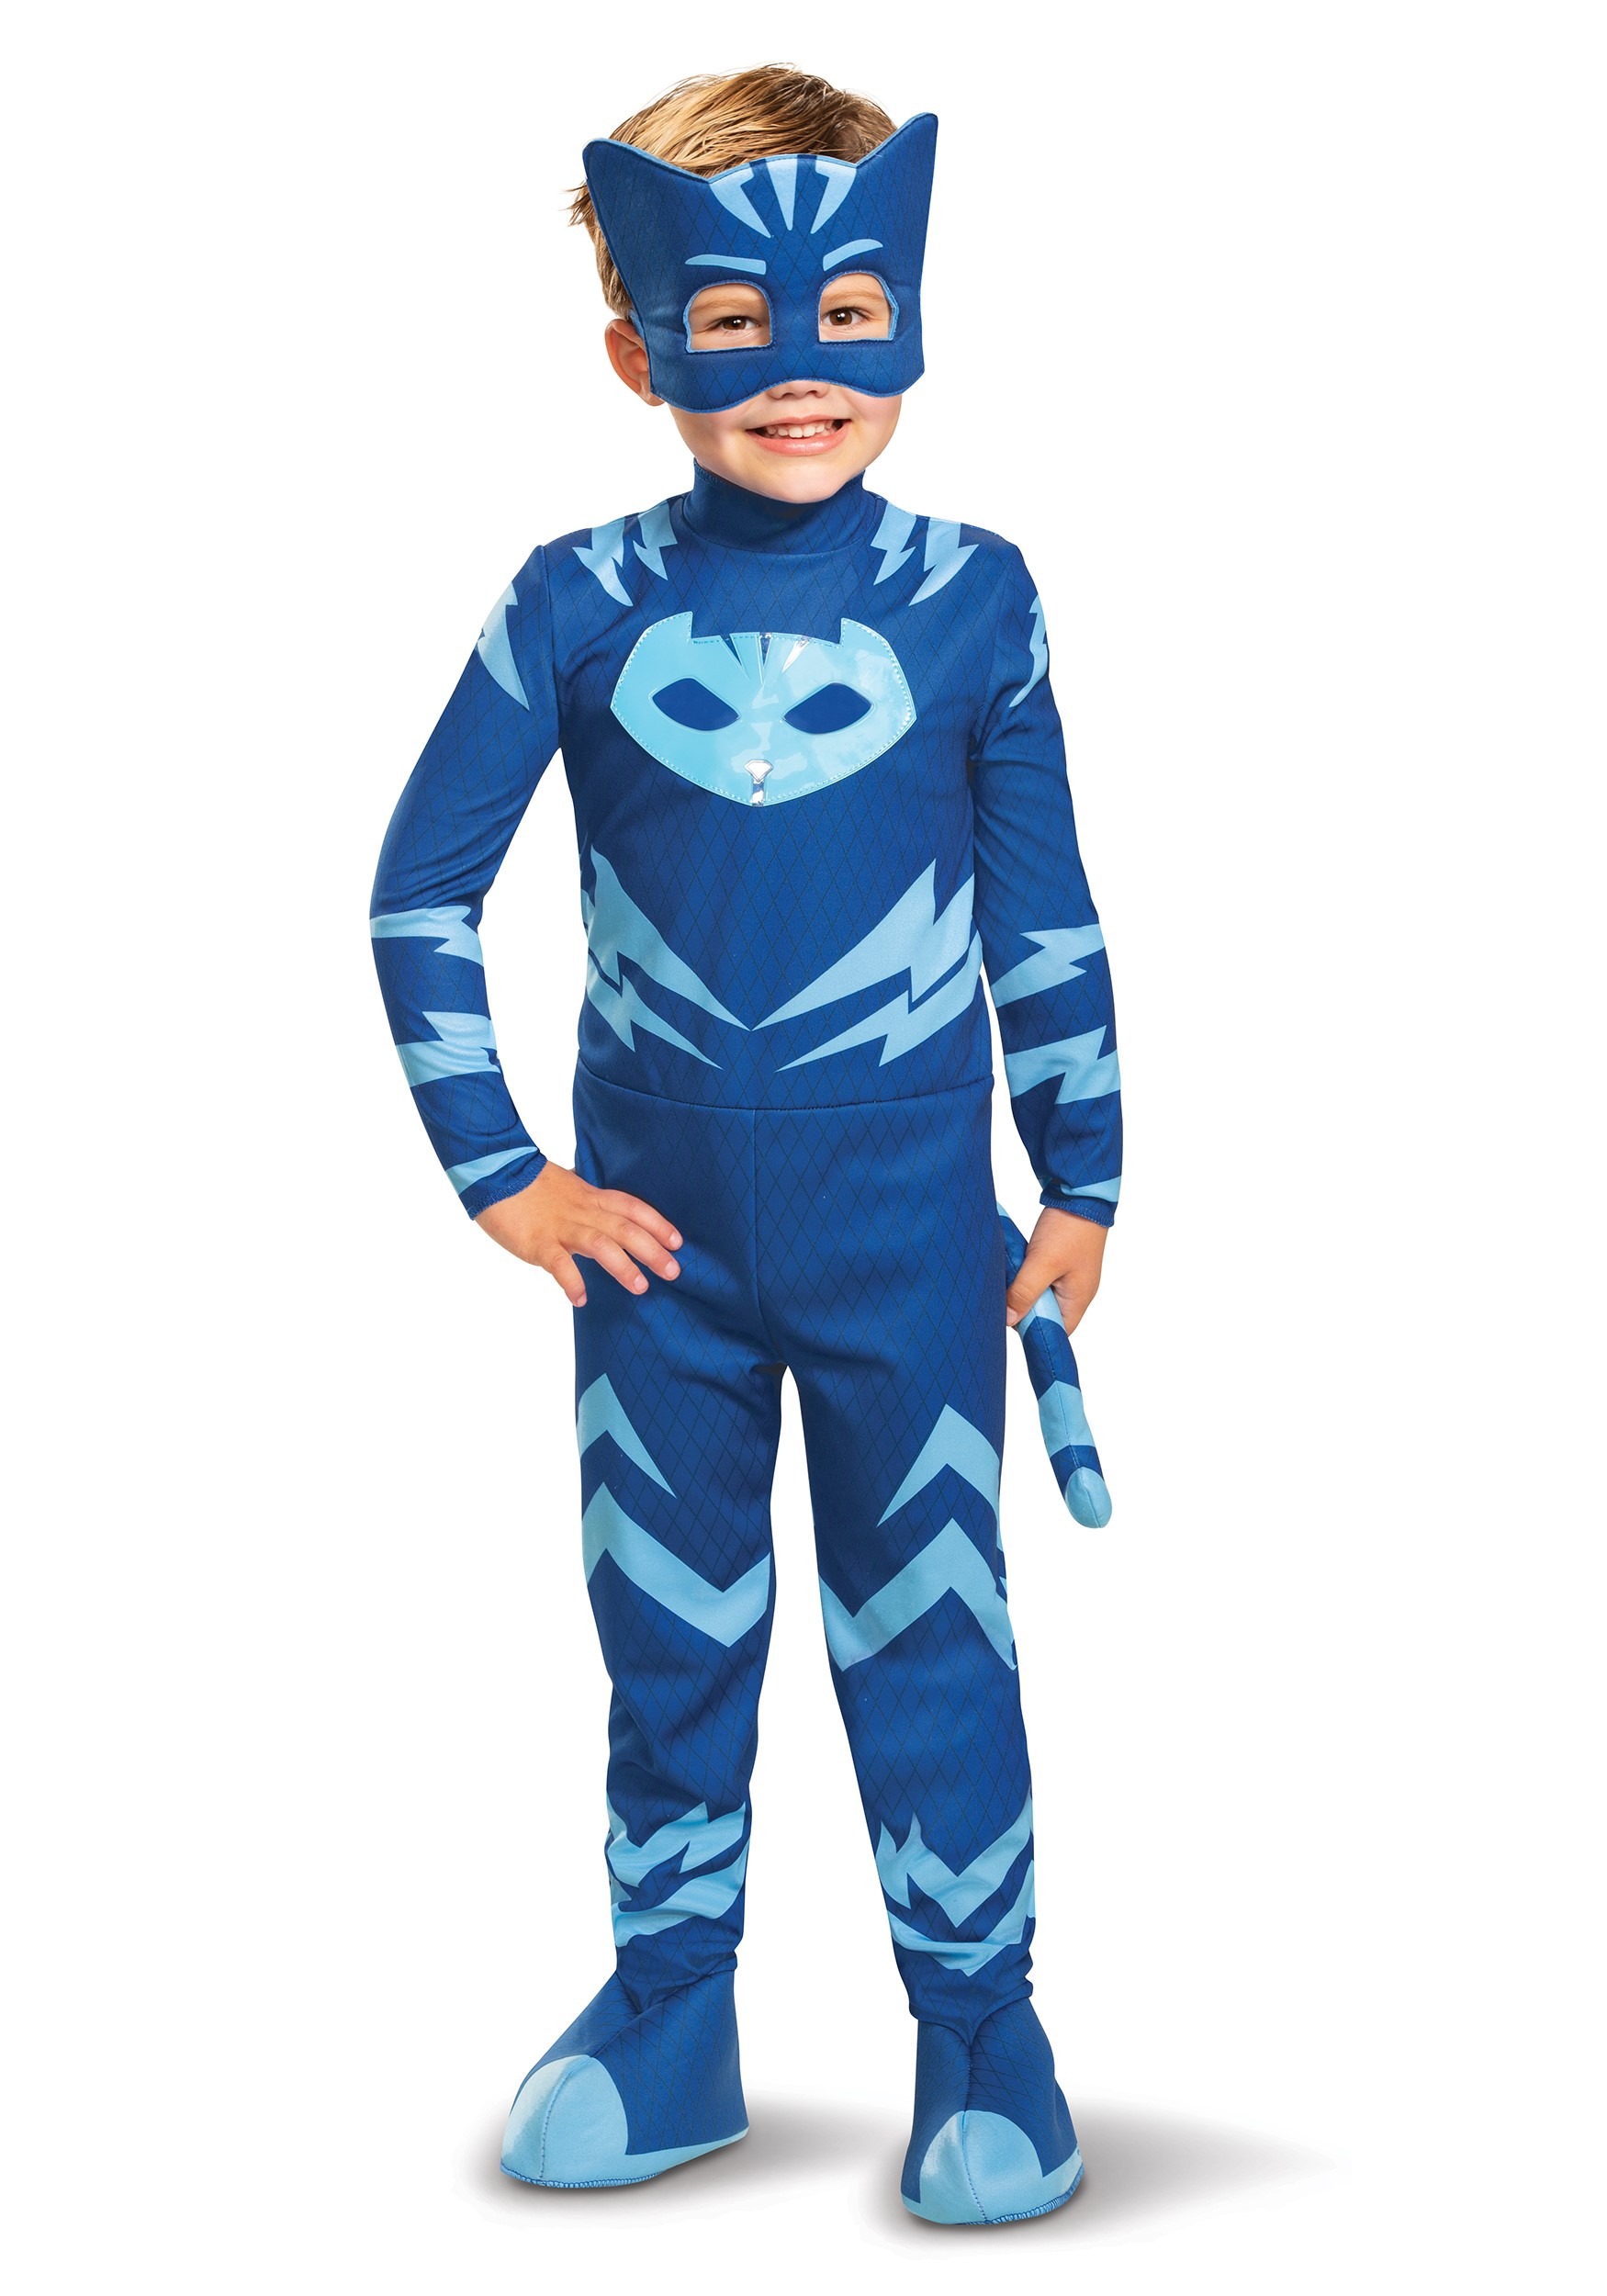 Photos - Fancy Dress PJ Masks Disguise Boy's  Catboy Deluxe Light Up Costume | Kid's Costumes Bl 